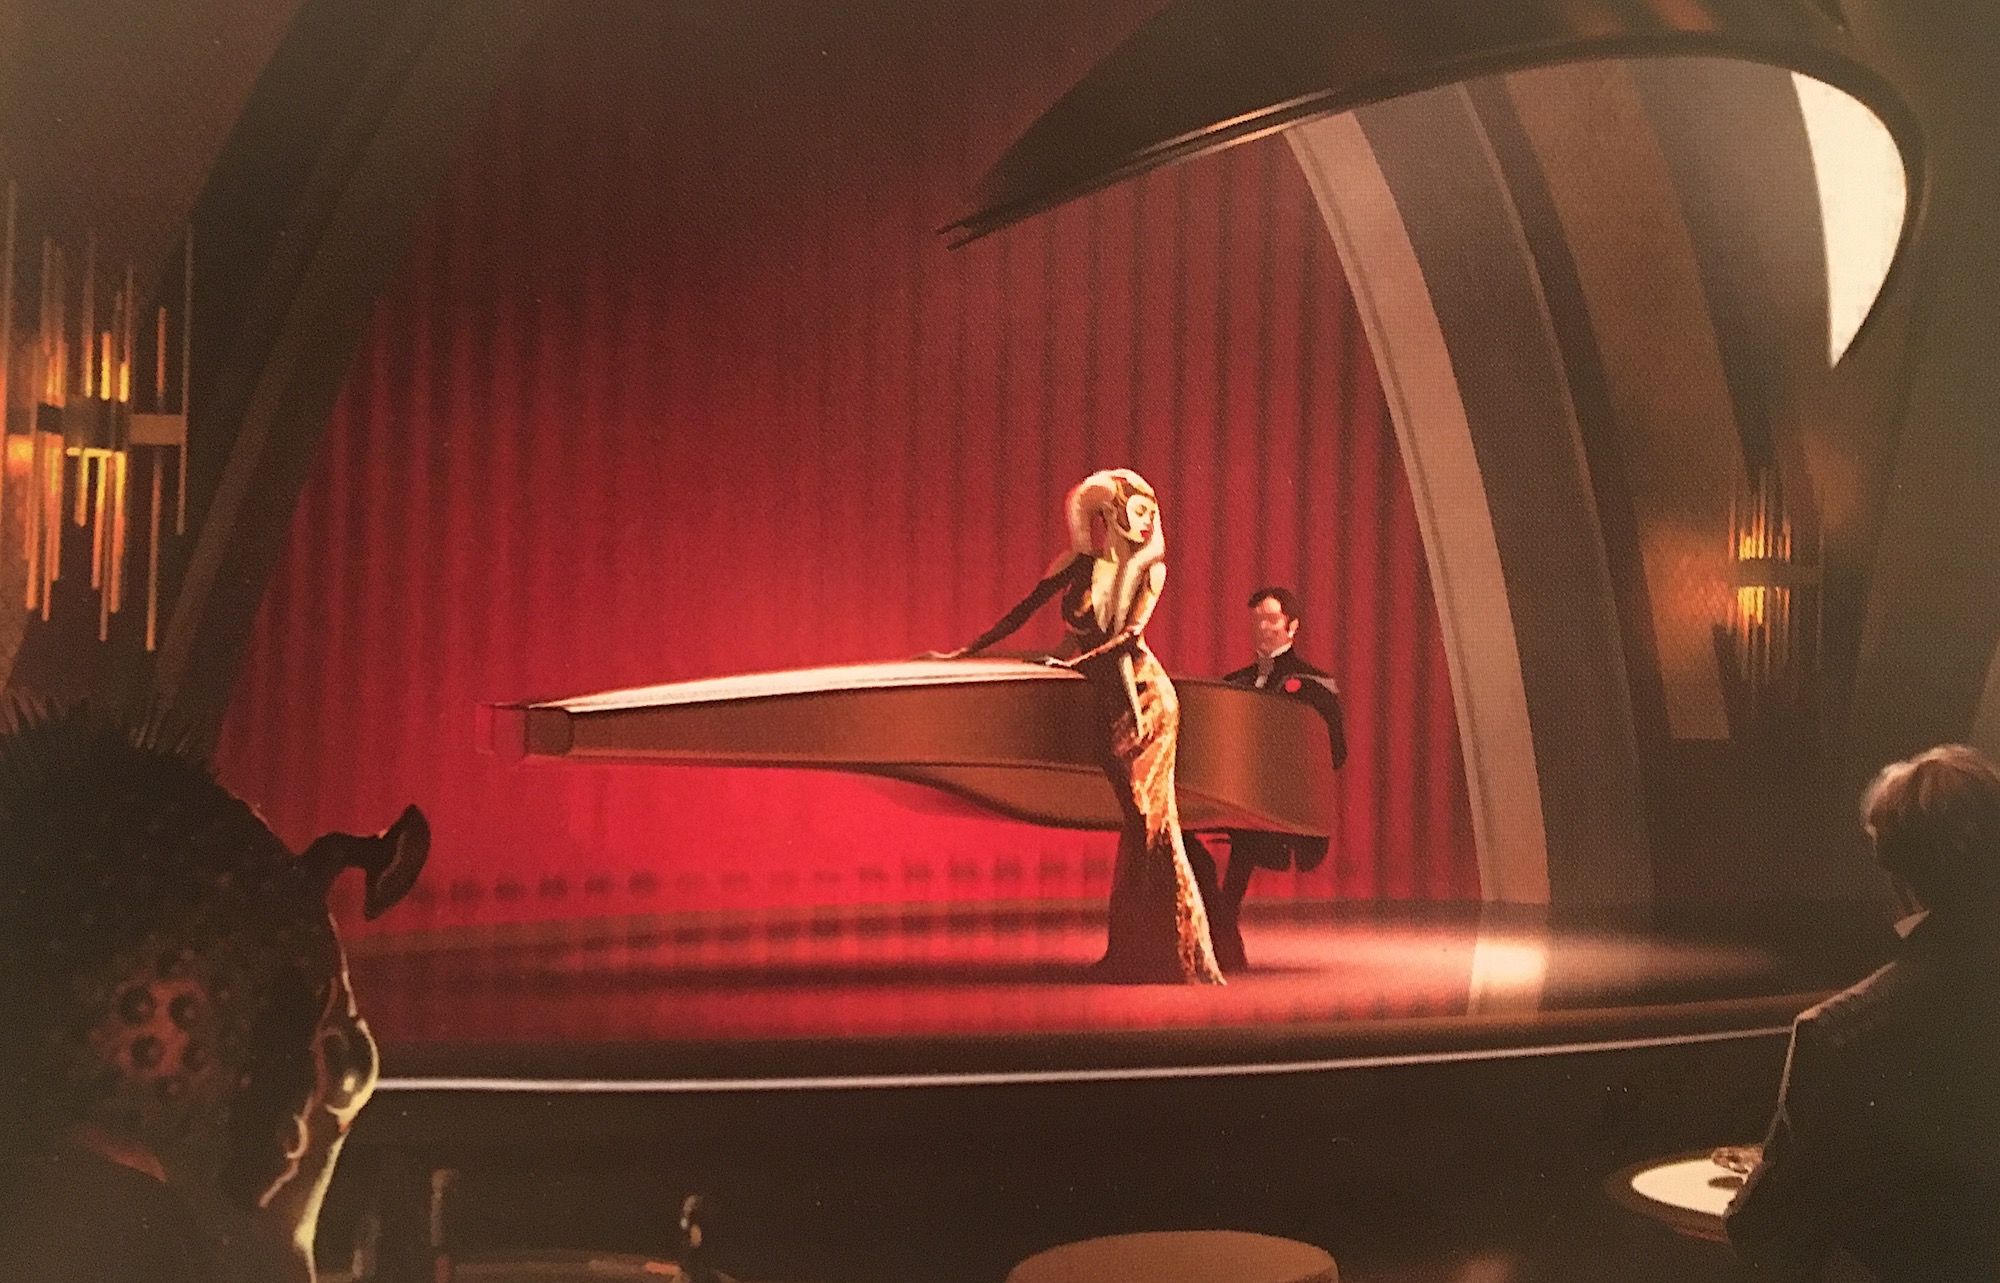 An alternate introduction to the Master Codebreaker in Star Wars The Last Jedi concept art